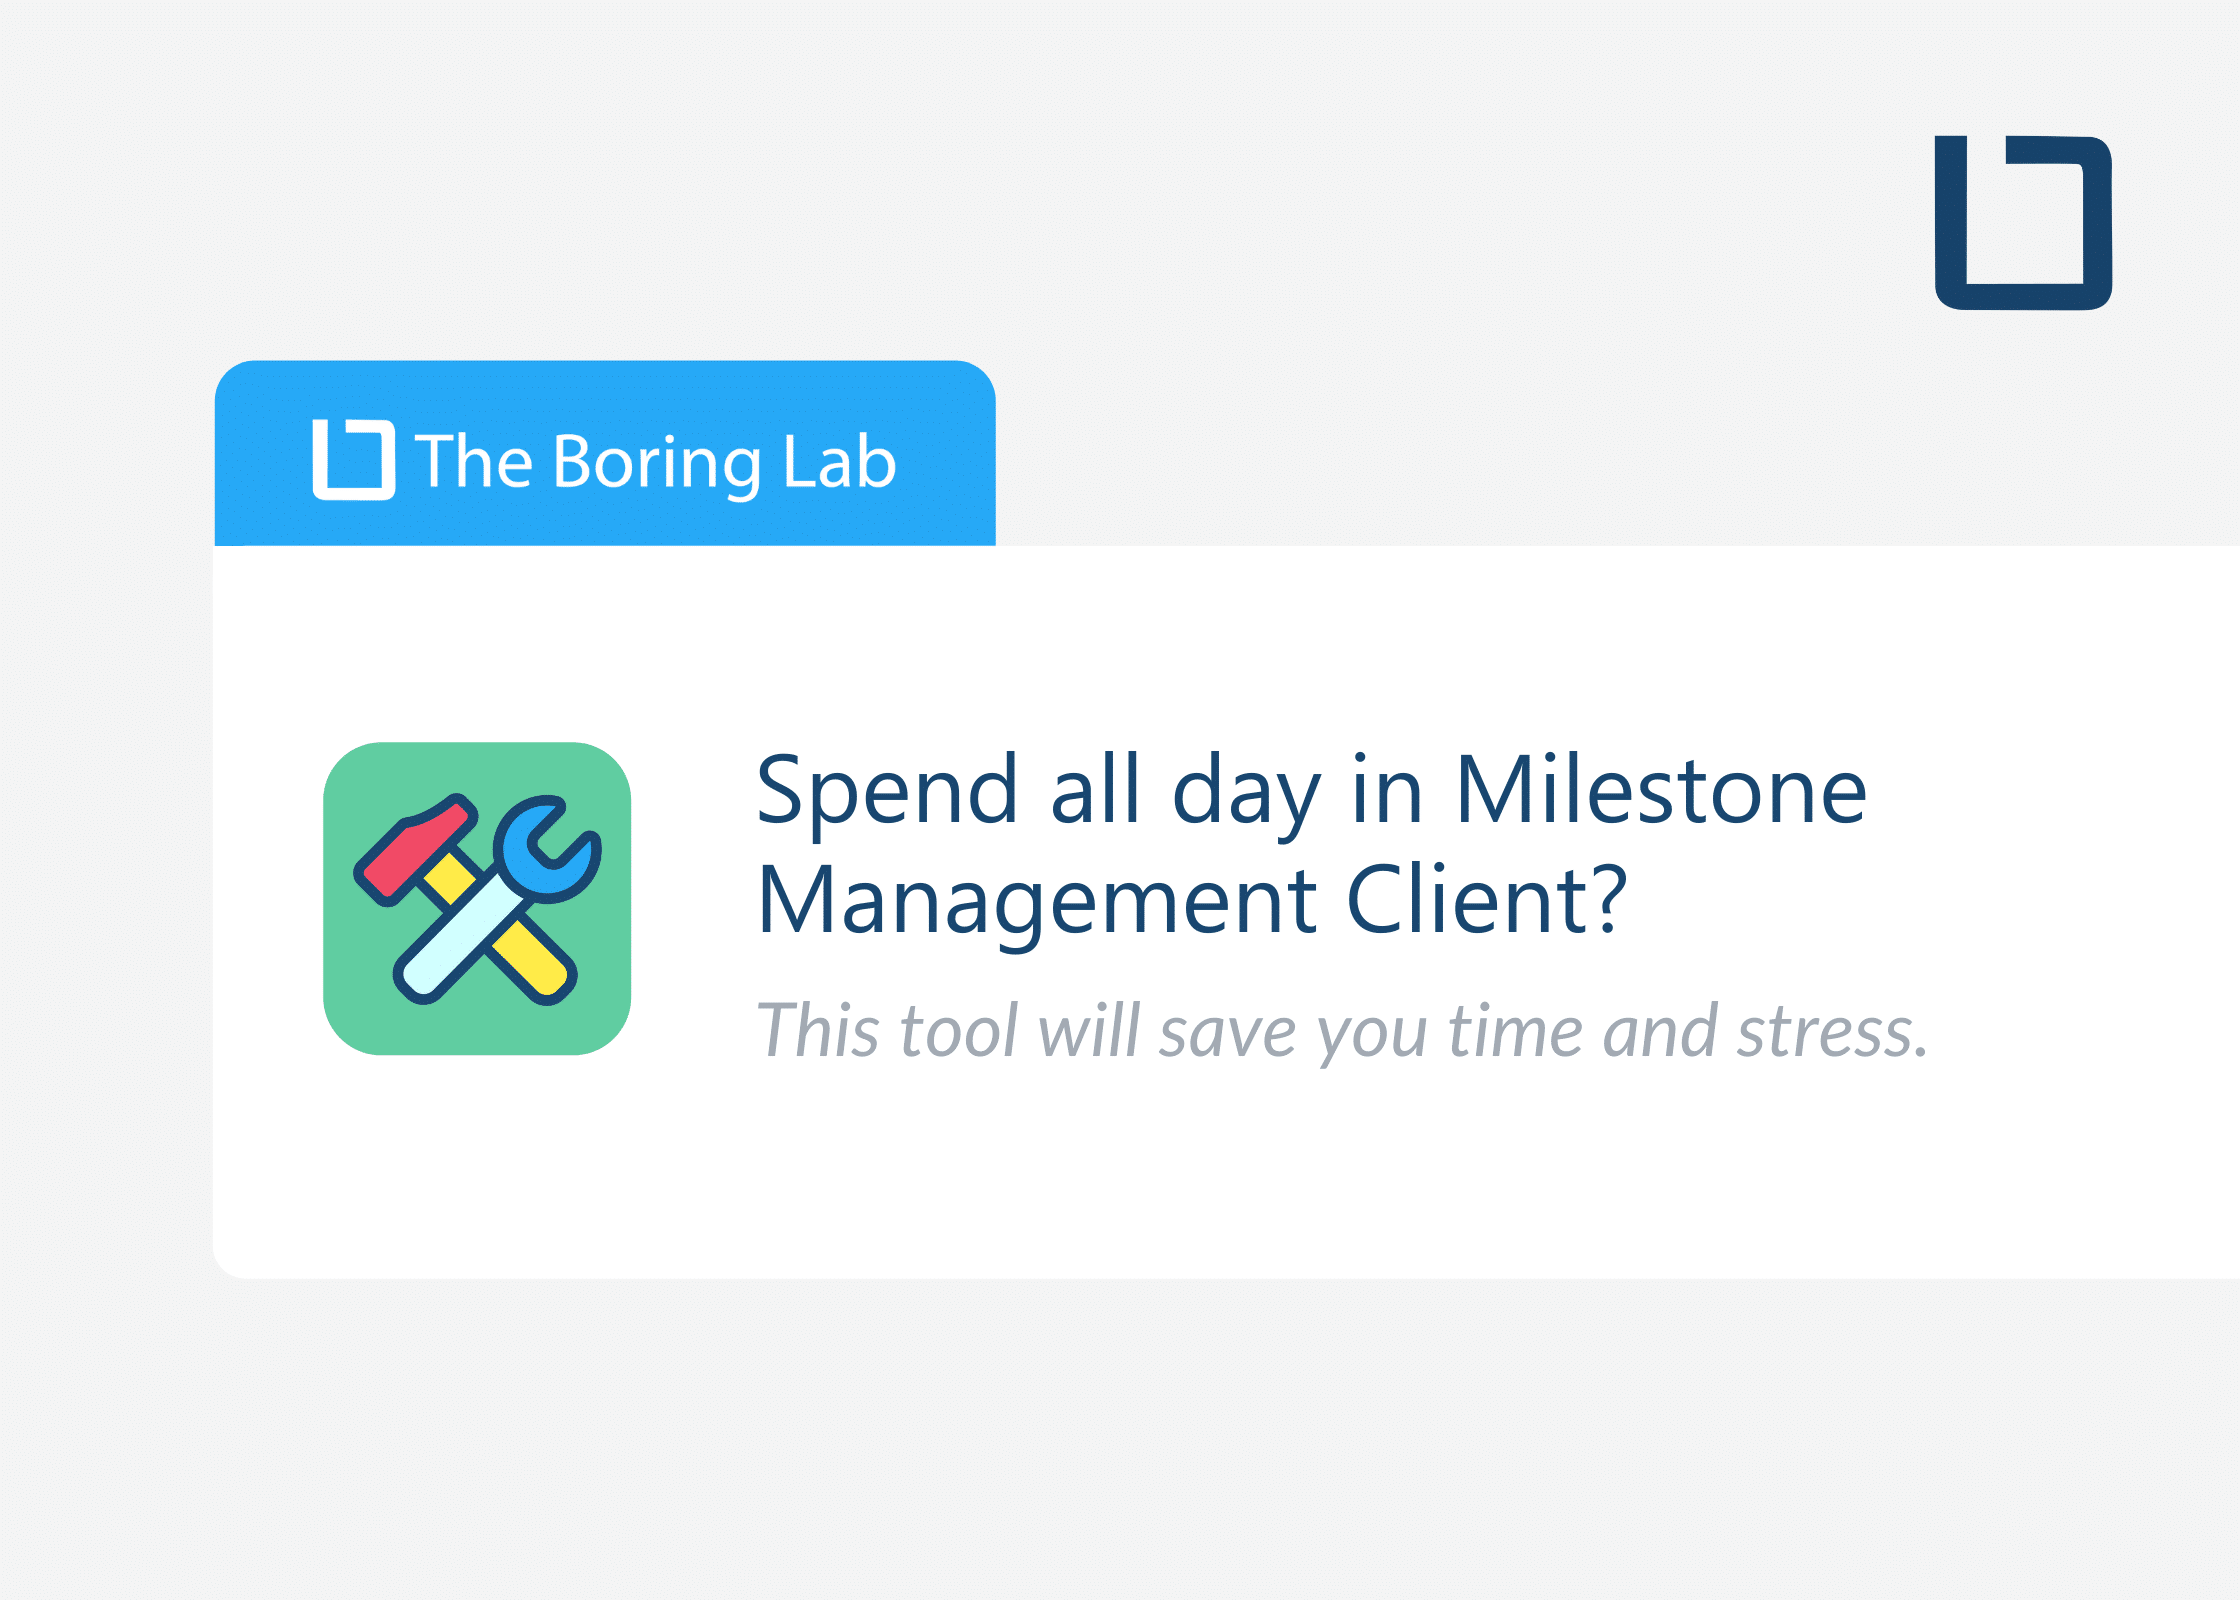 Spend all day in Milestone Management Client? This tool will save you time and stress in managing XProtect.